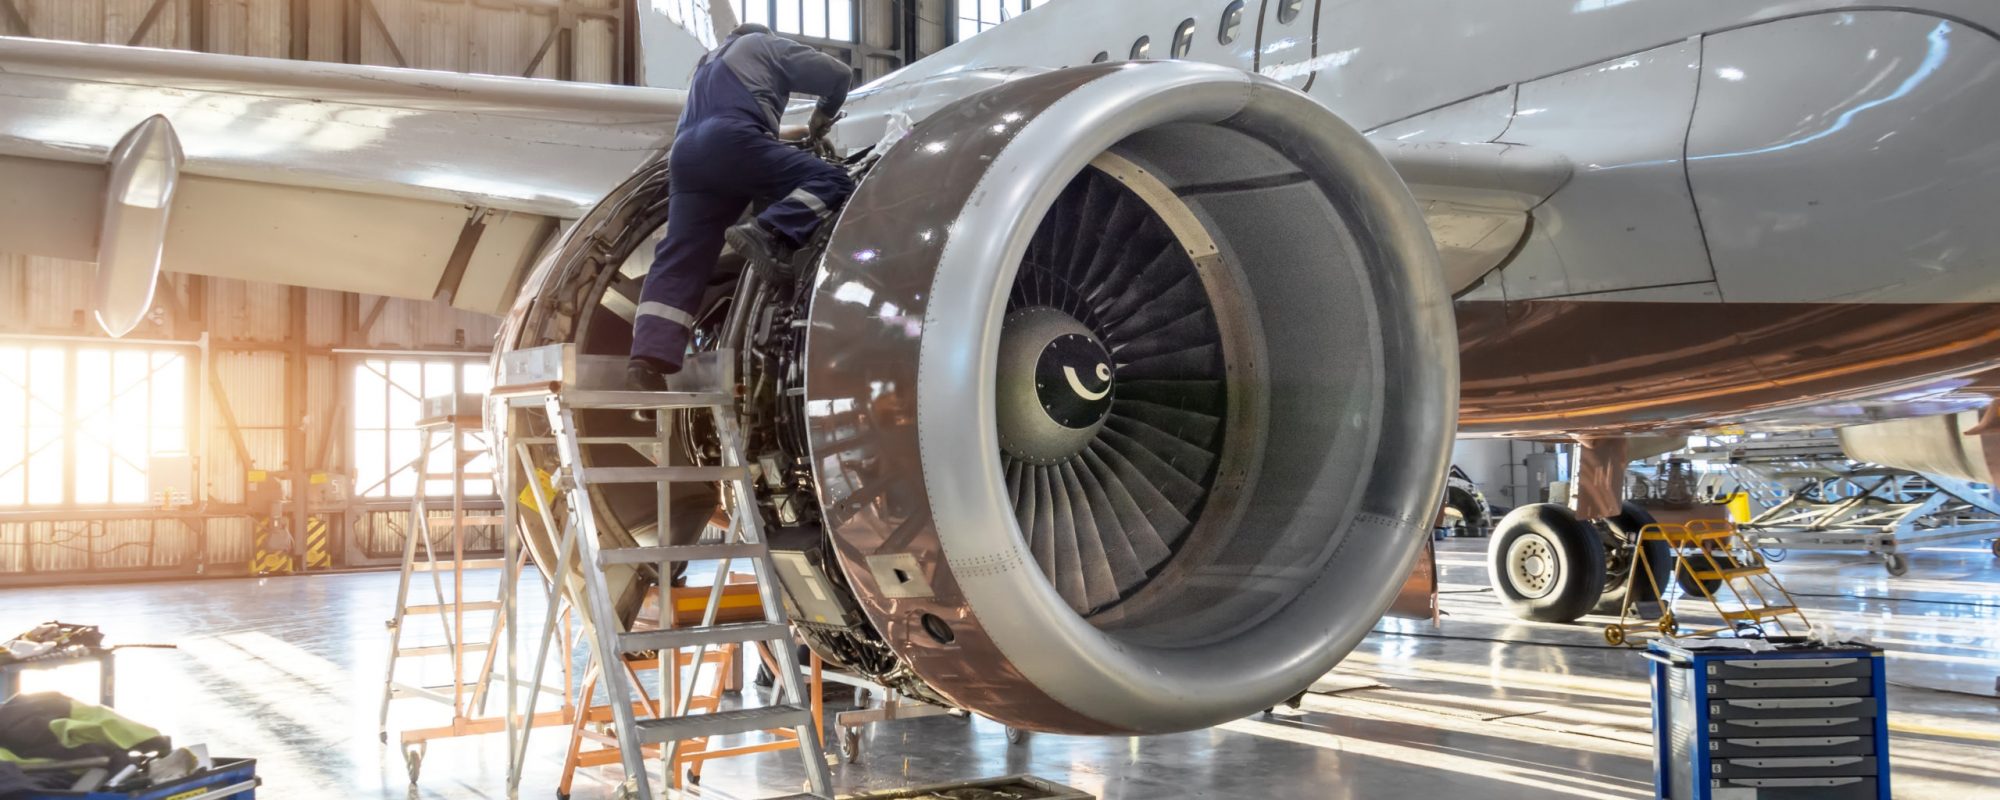 Mechanic specialist repairs the maintenance of engine of a passenger aircraft in a hangar.